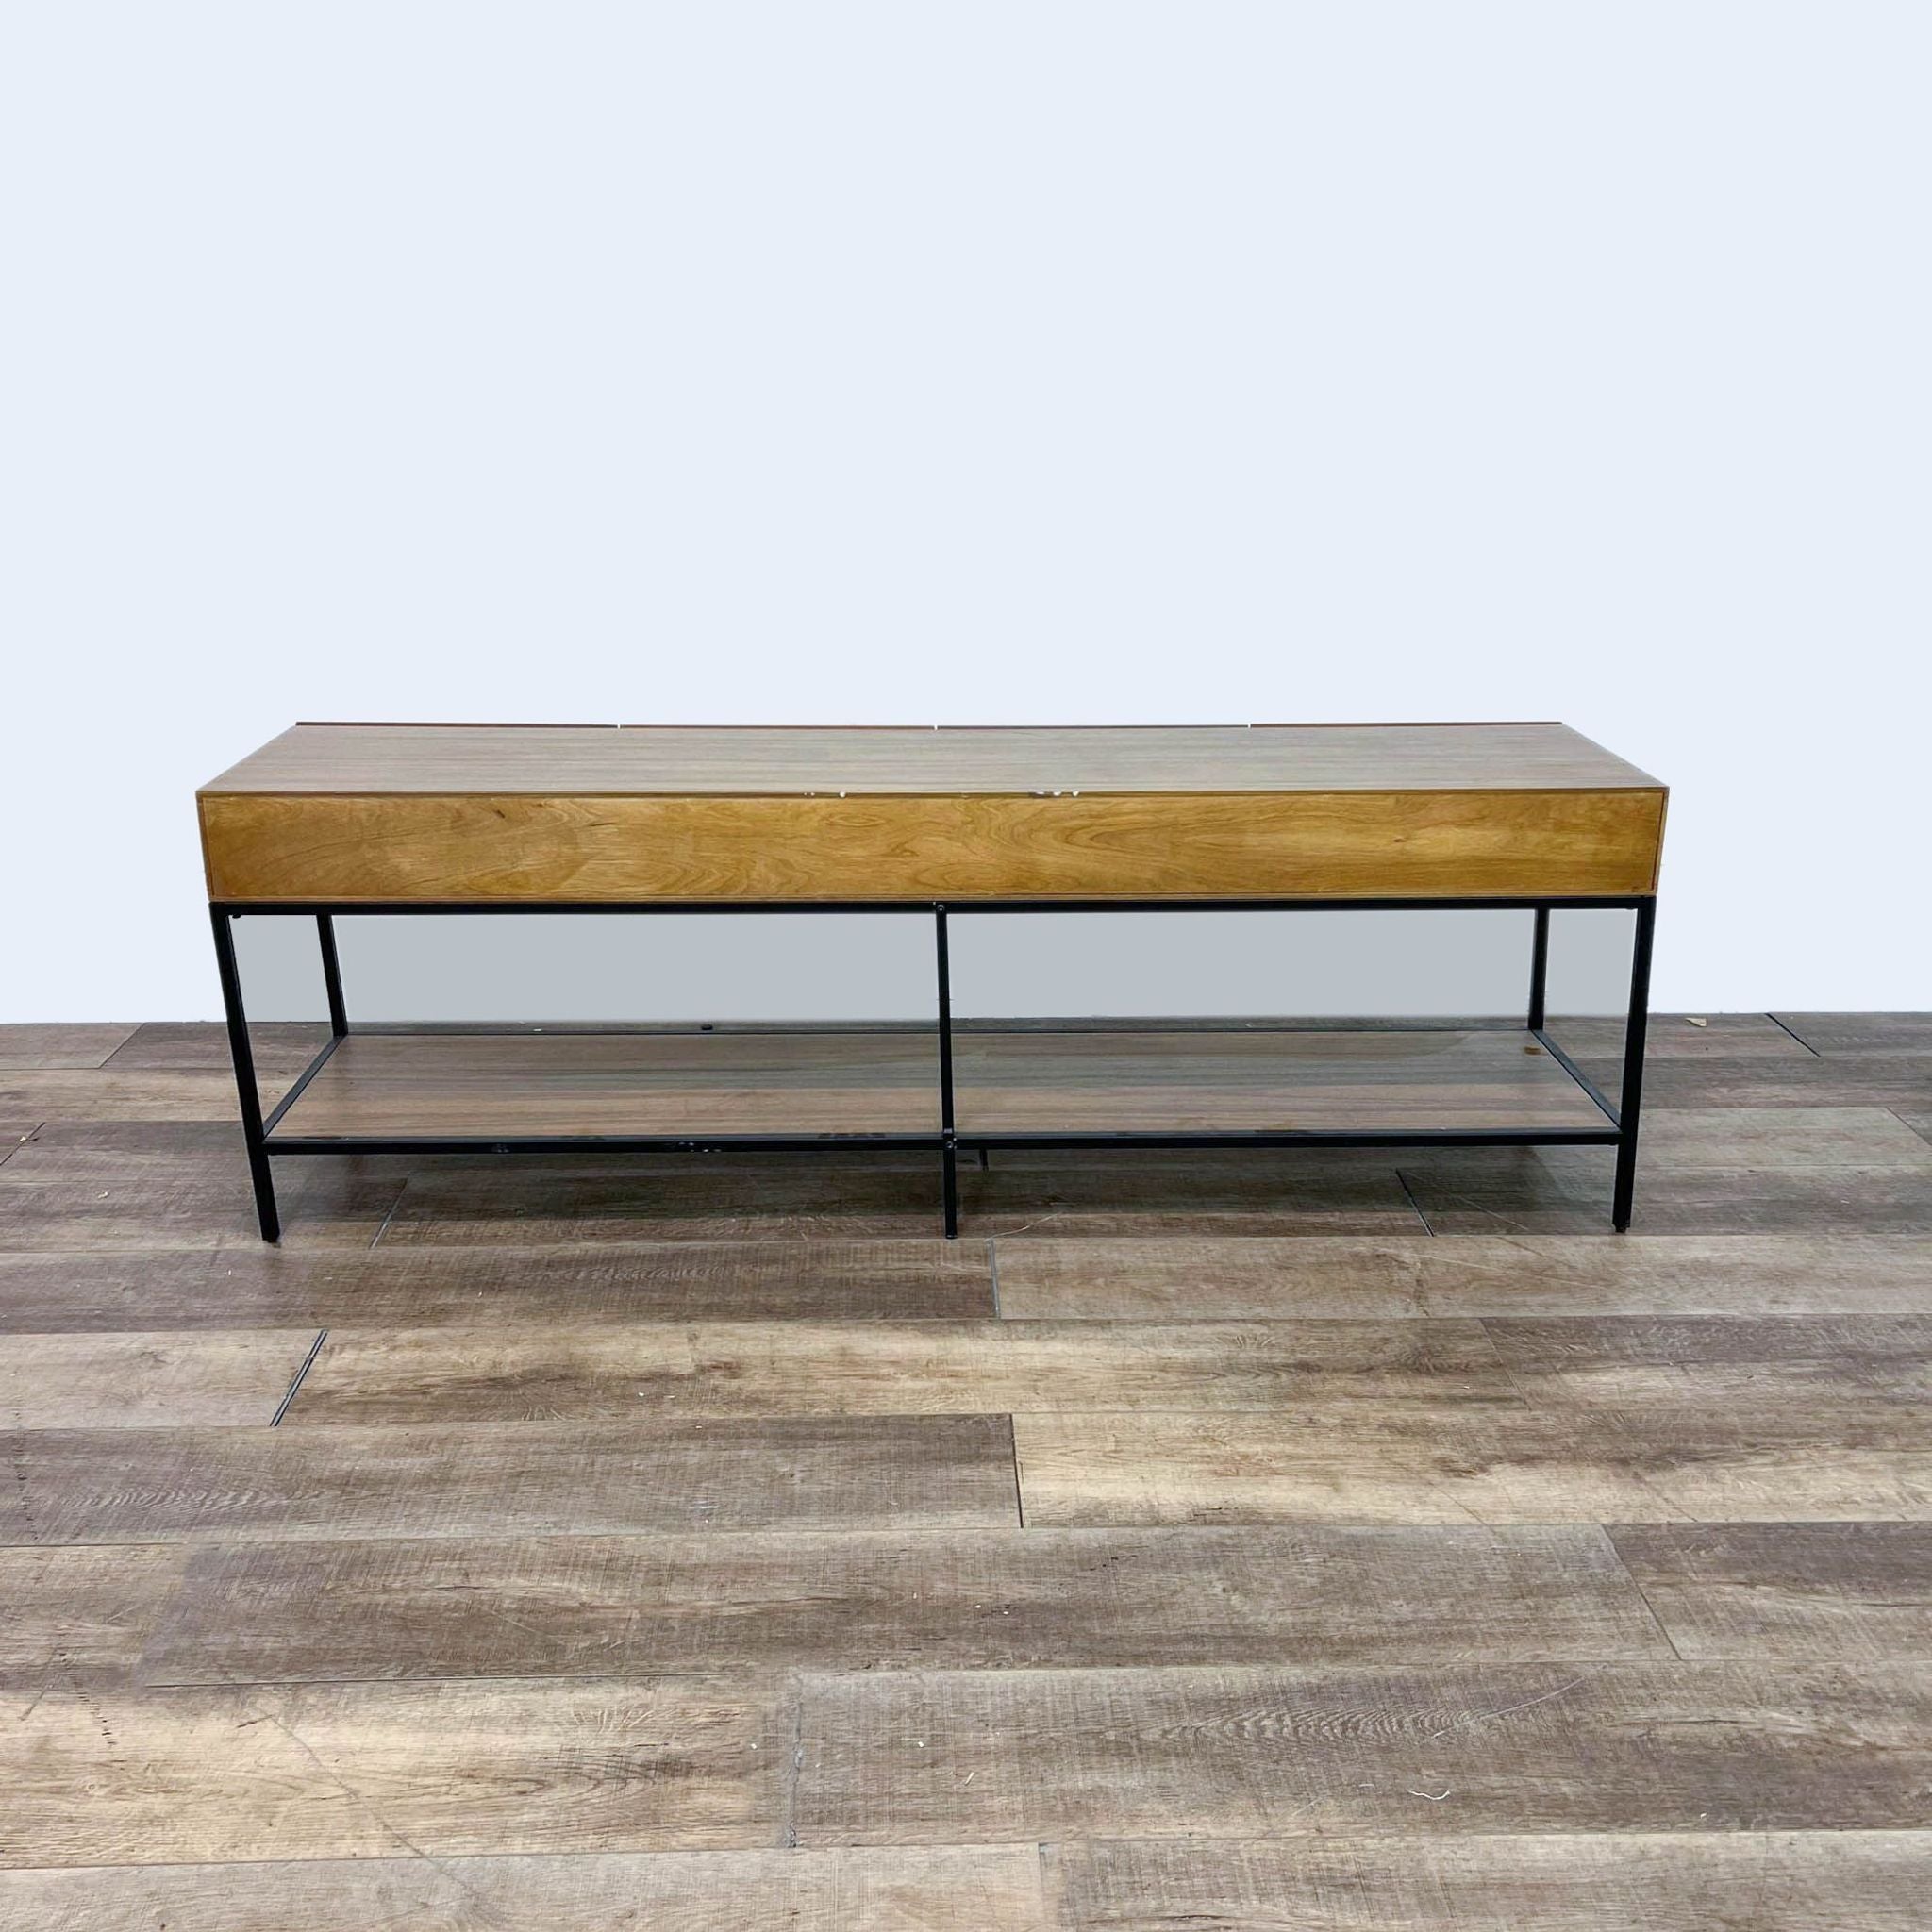 ROC brand sideboard with a metal base and light wood finish, featuring two drawers and a lower shelf, positioned on a wooden floor.